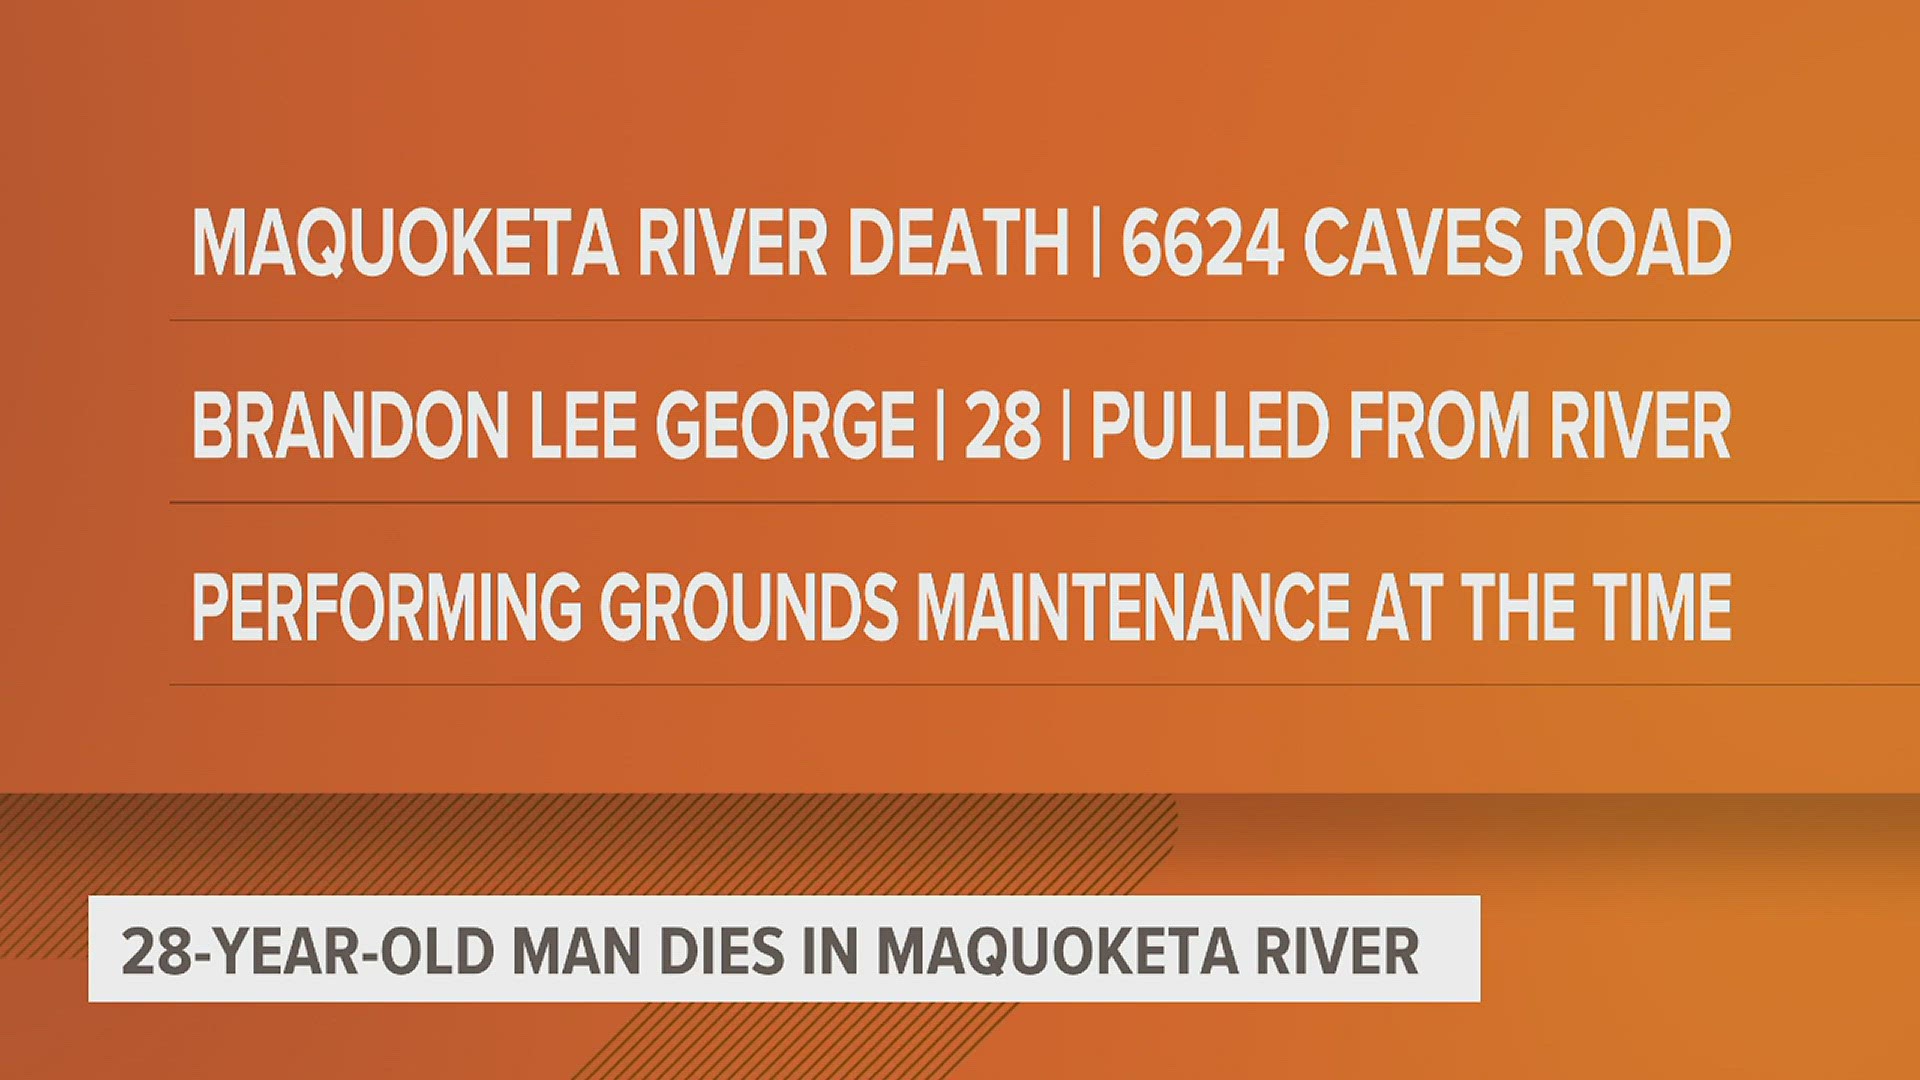 28-year-old Brandon George was found in the Maquoketa River after disappearing during some maintenance work.